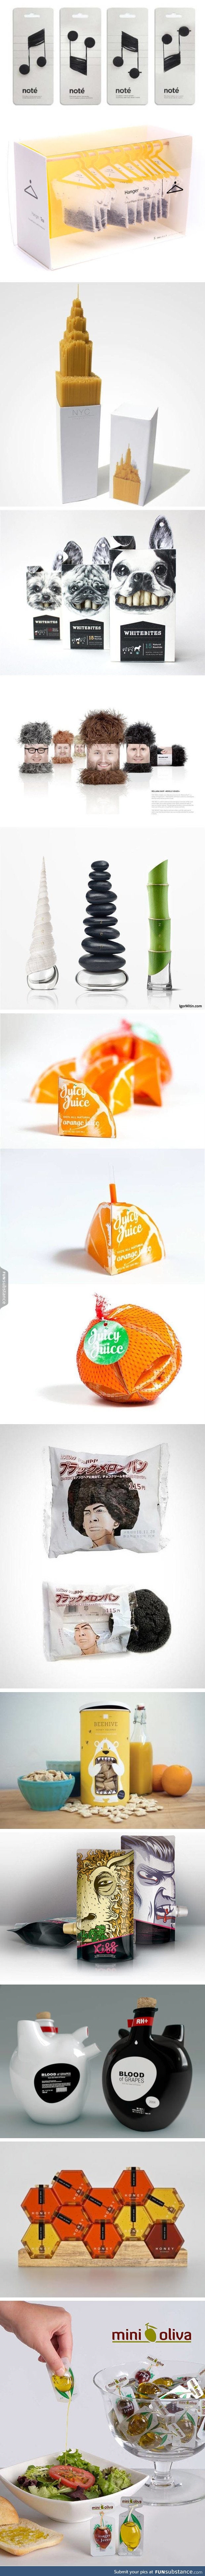 Creative and quirky packaging comp